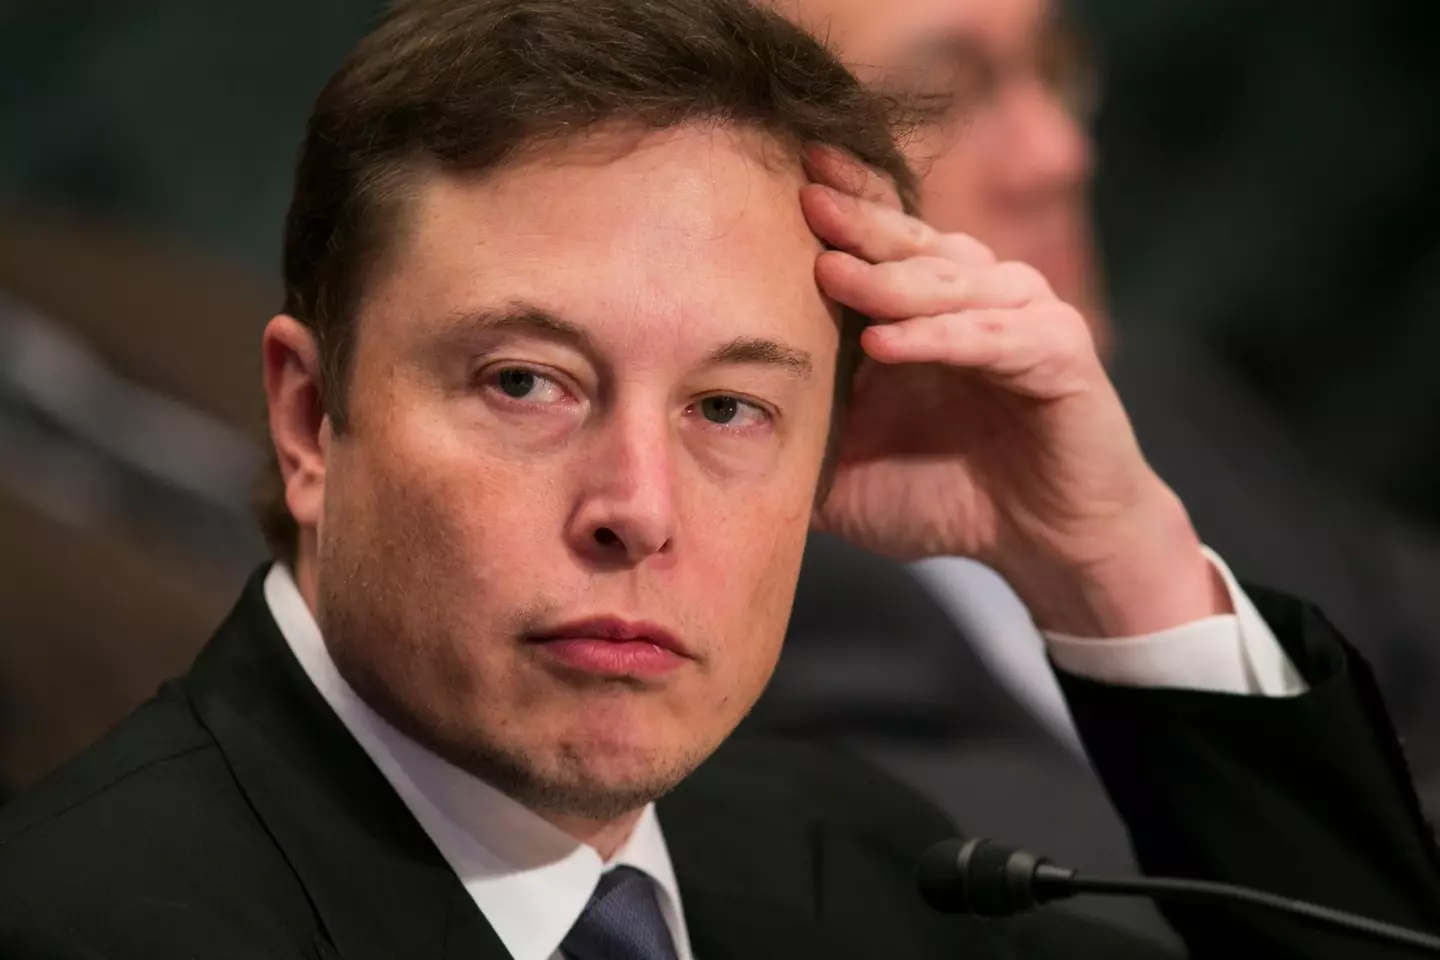 It was reported on Thursday that Twitter’s board of directors is unlikely to accept Musk’s offer.